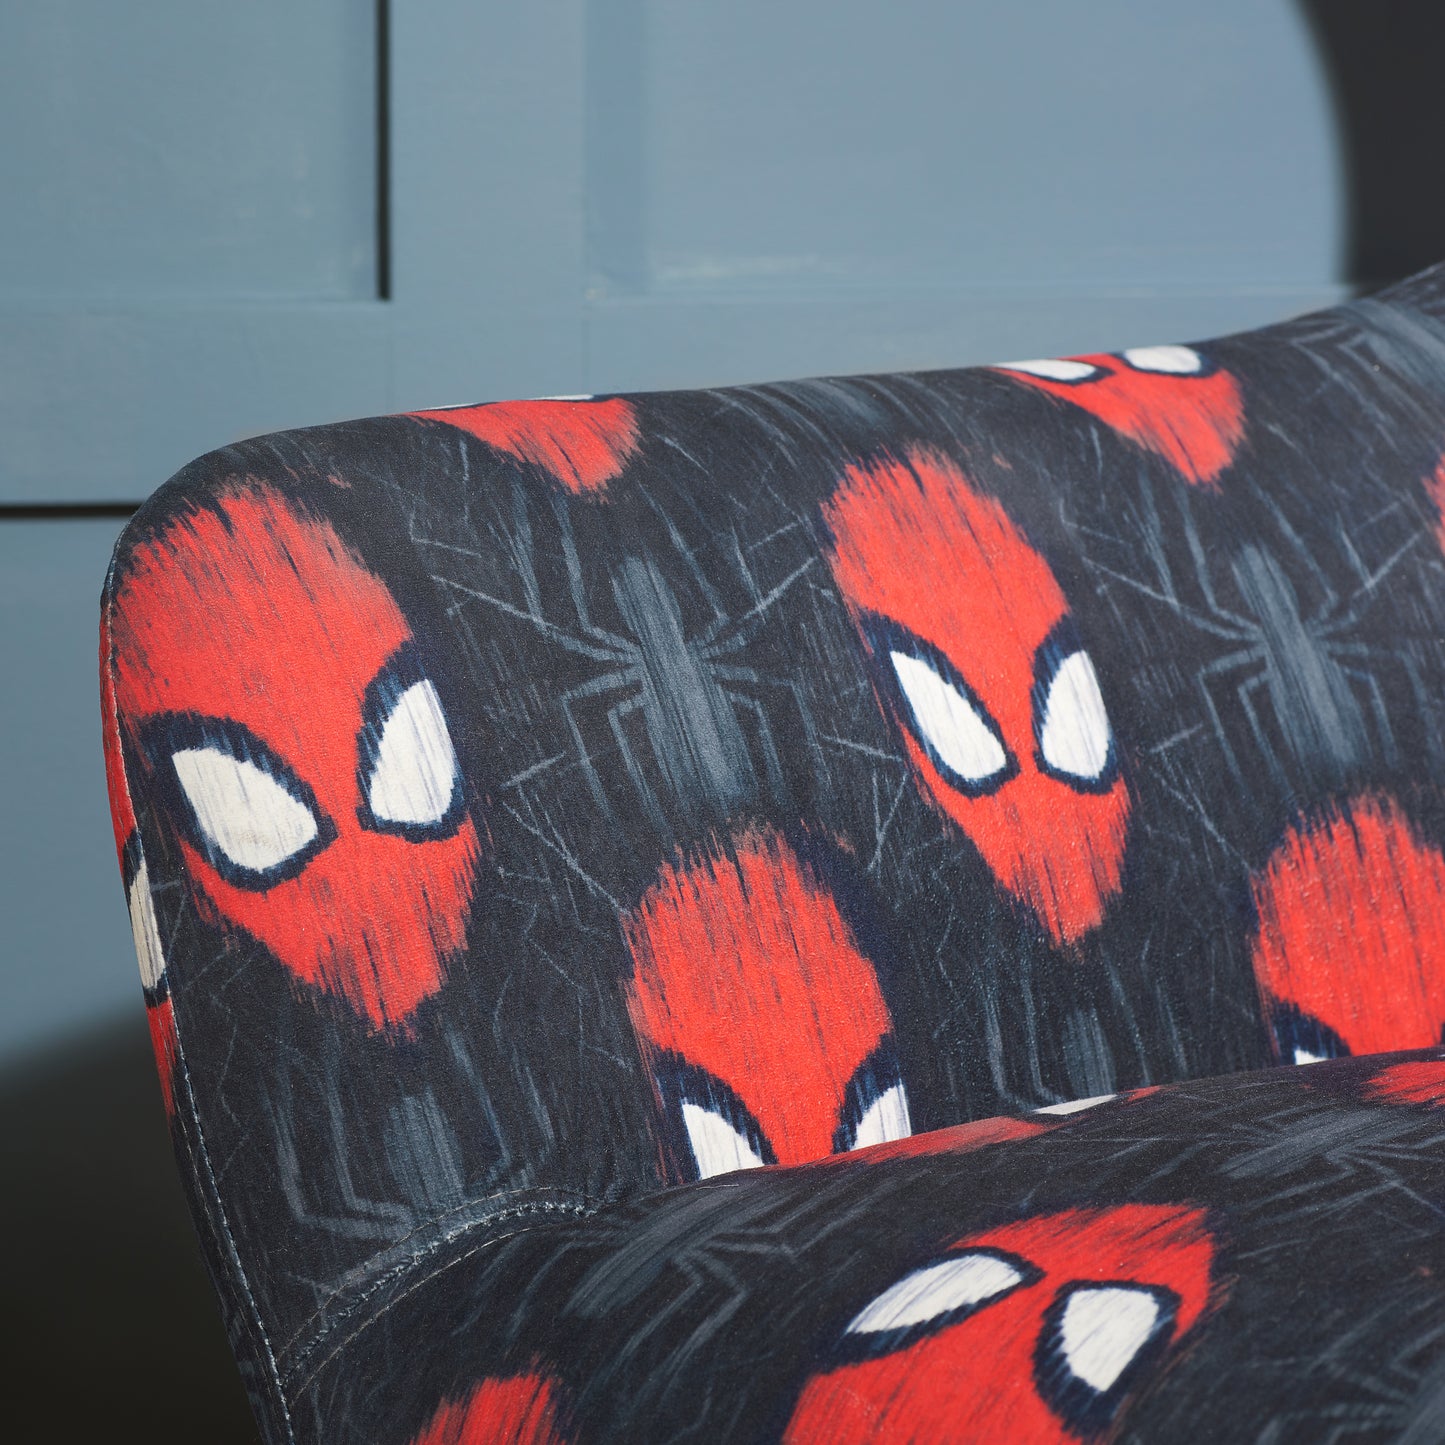 Disney Home - Spider-man Occasional Chair - Kidsly